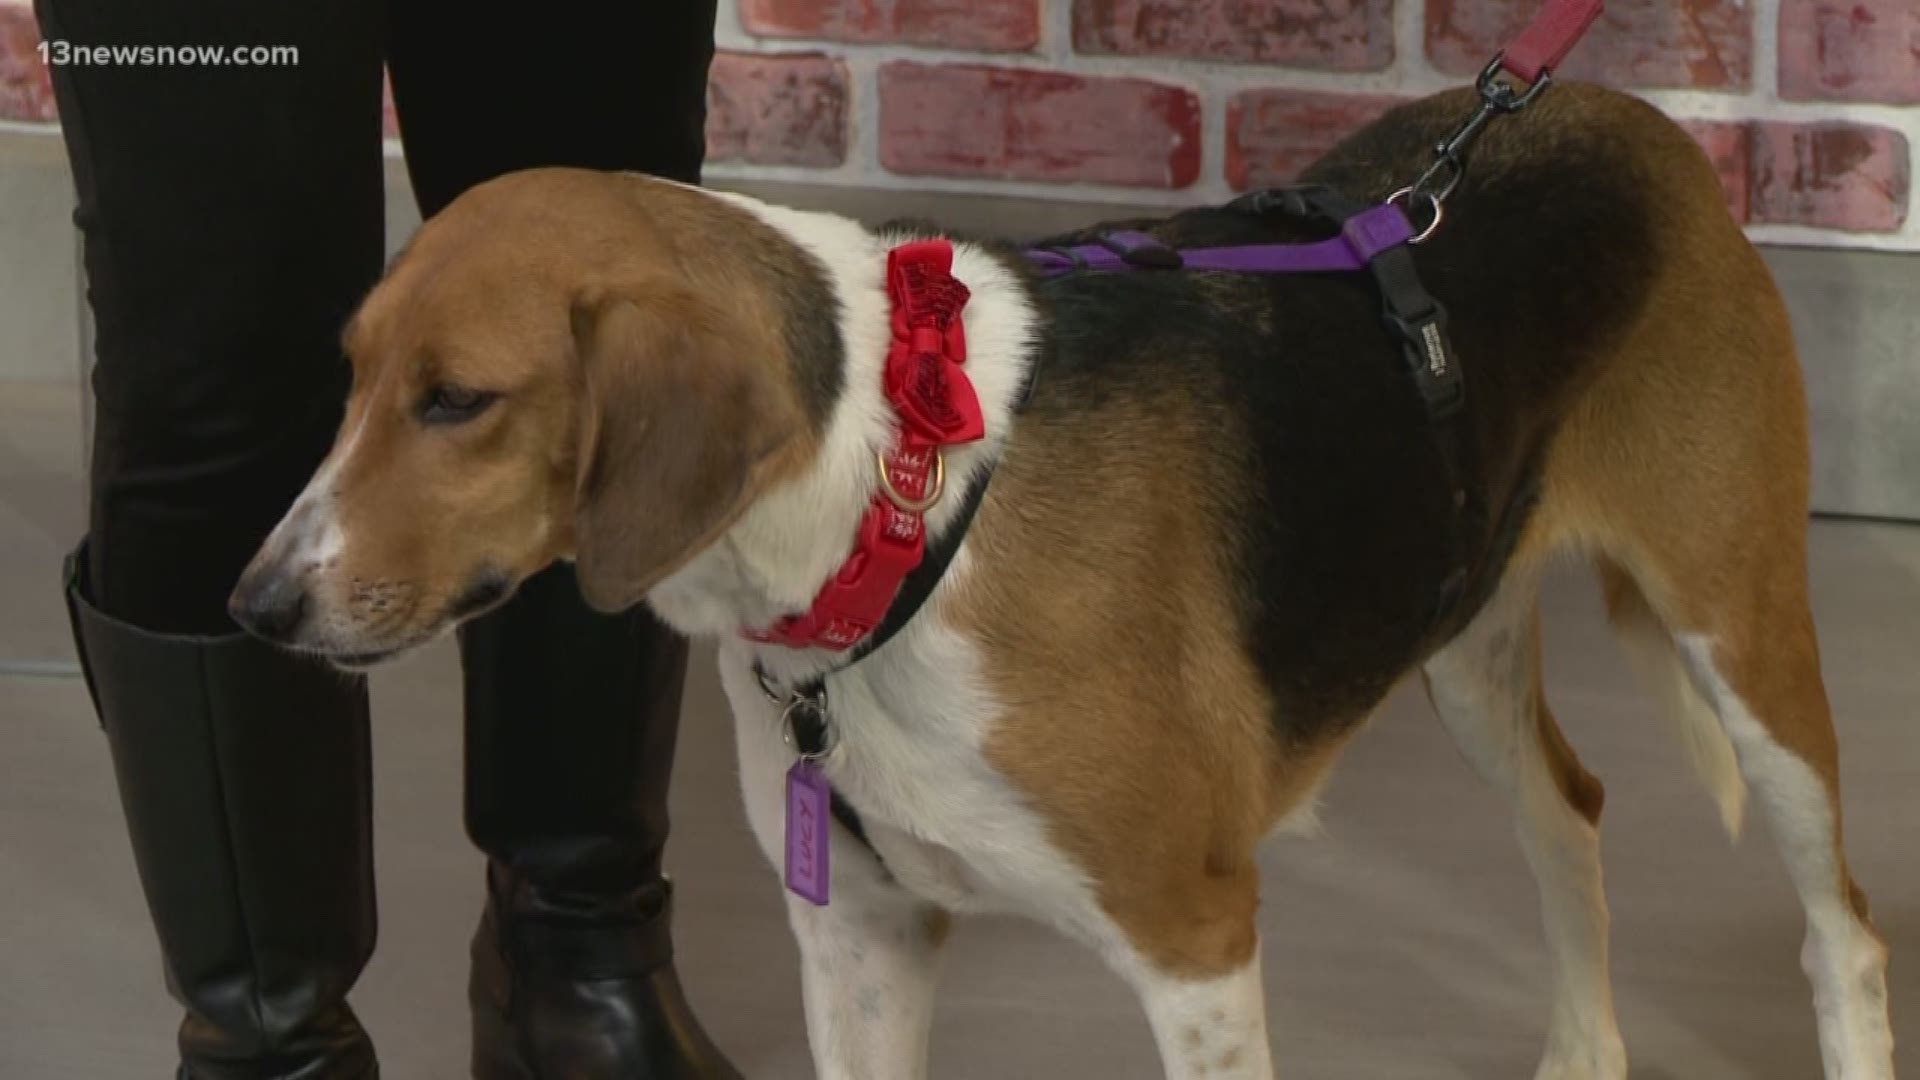 Lucy, a walker hound, was rescued from a high-kill shelter. She's calm and likes long walks. Are you interested in adopting her?